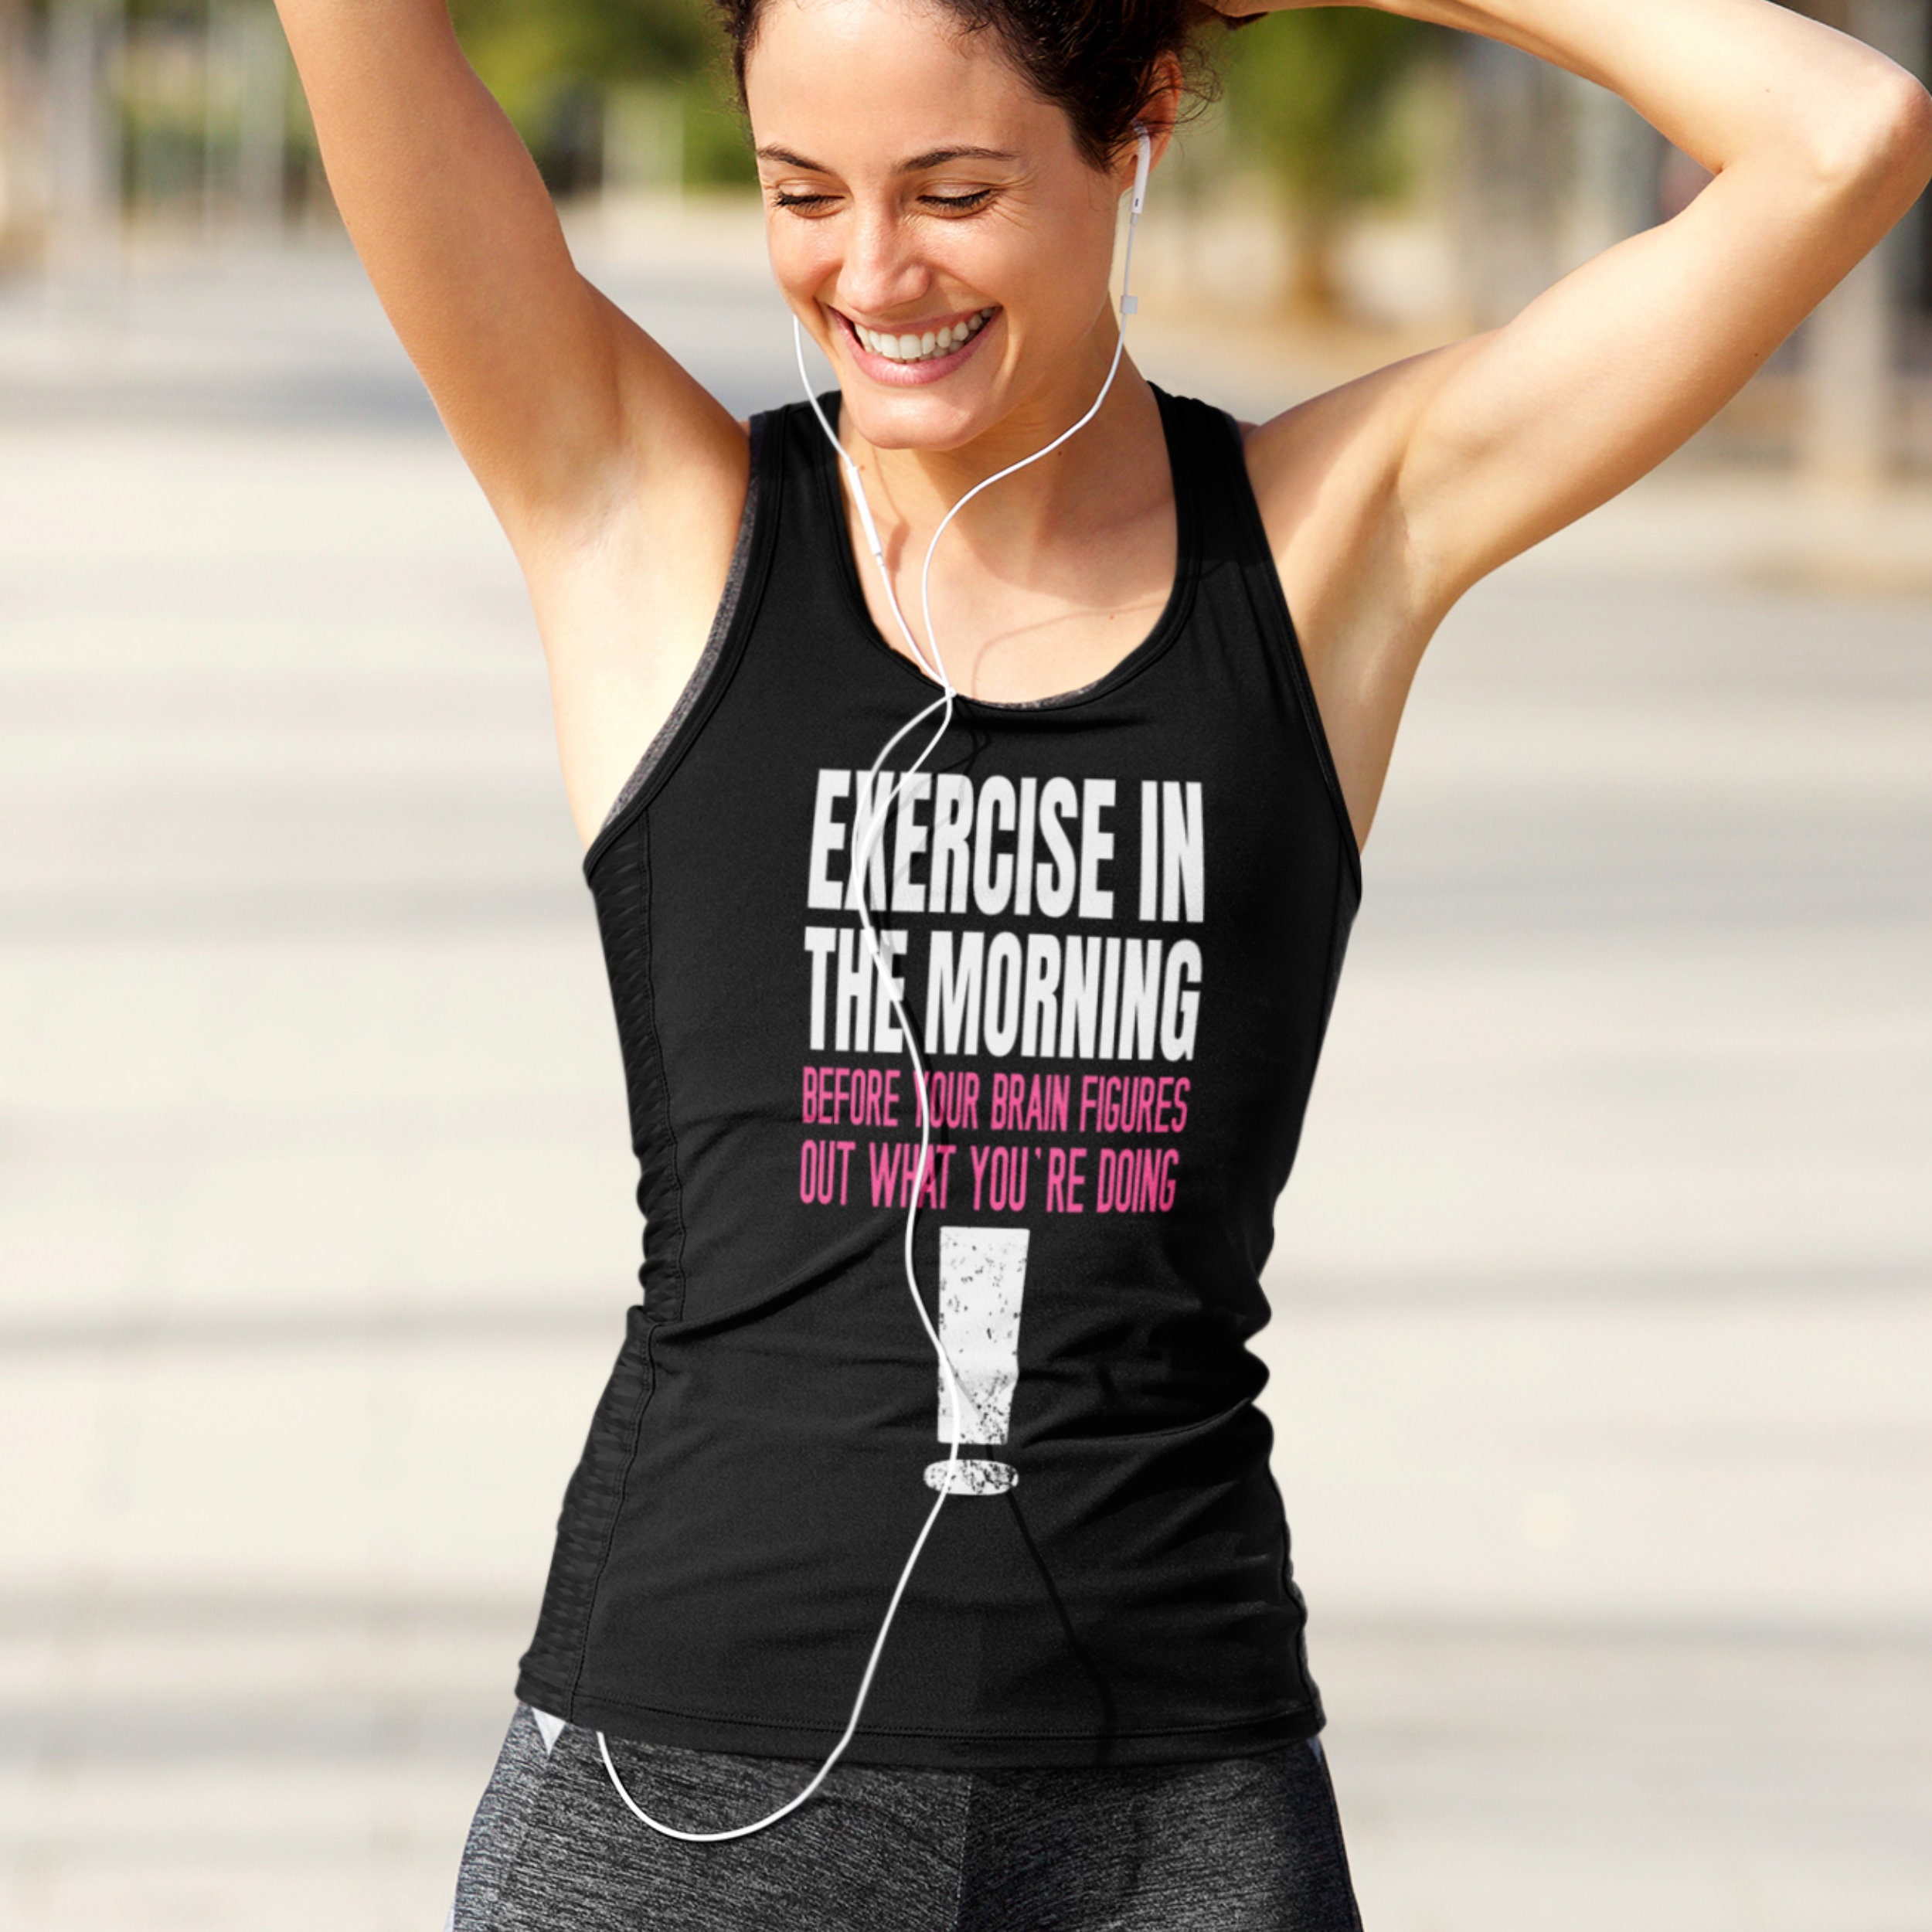 7 Funny Fitness Shirts You Need Now –